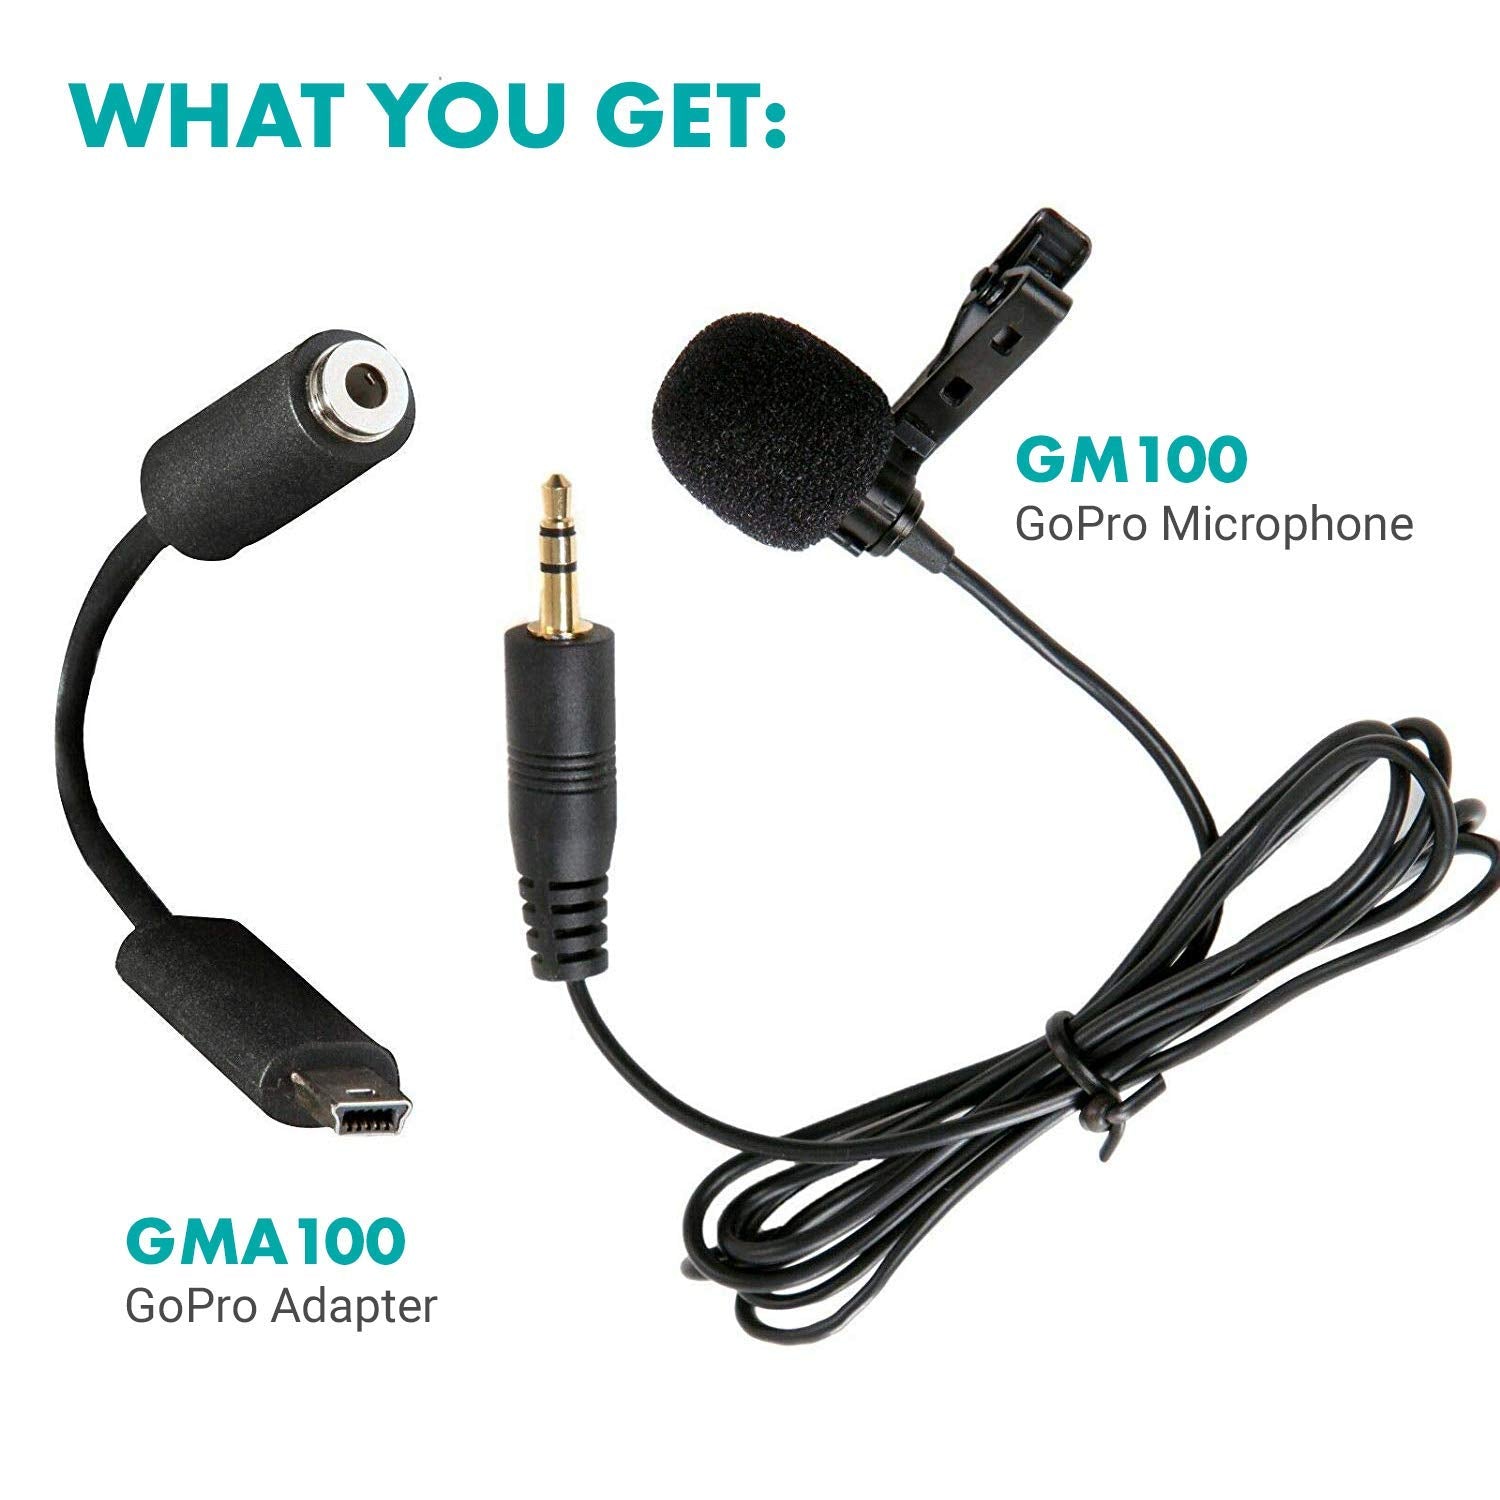 Movo GM100 Clip-on Lavalier Microphone for Compatible with GoPro HERO3, HERO3+ and HERO4 Black, White and Silver Editions - Includes Mic Adapter for Go Pro  - Acceptable